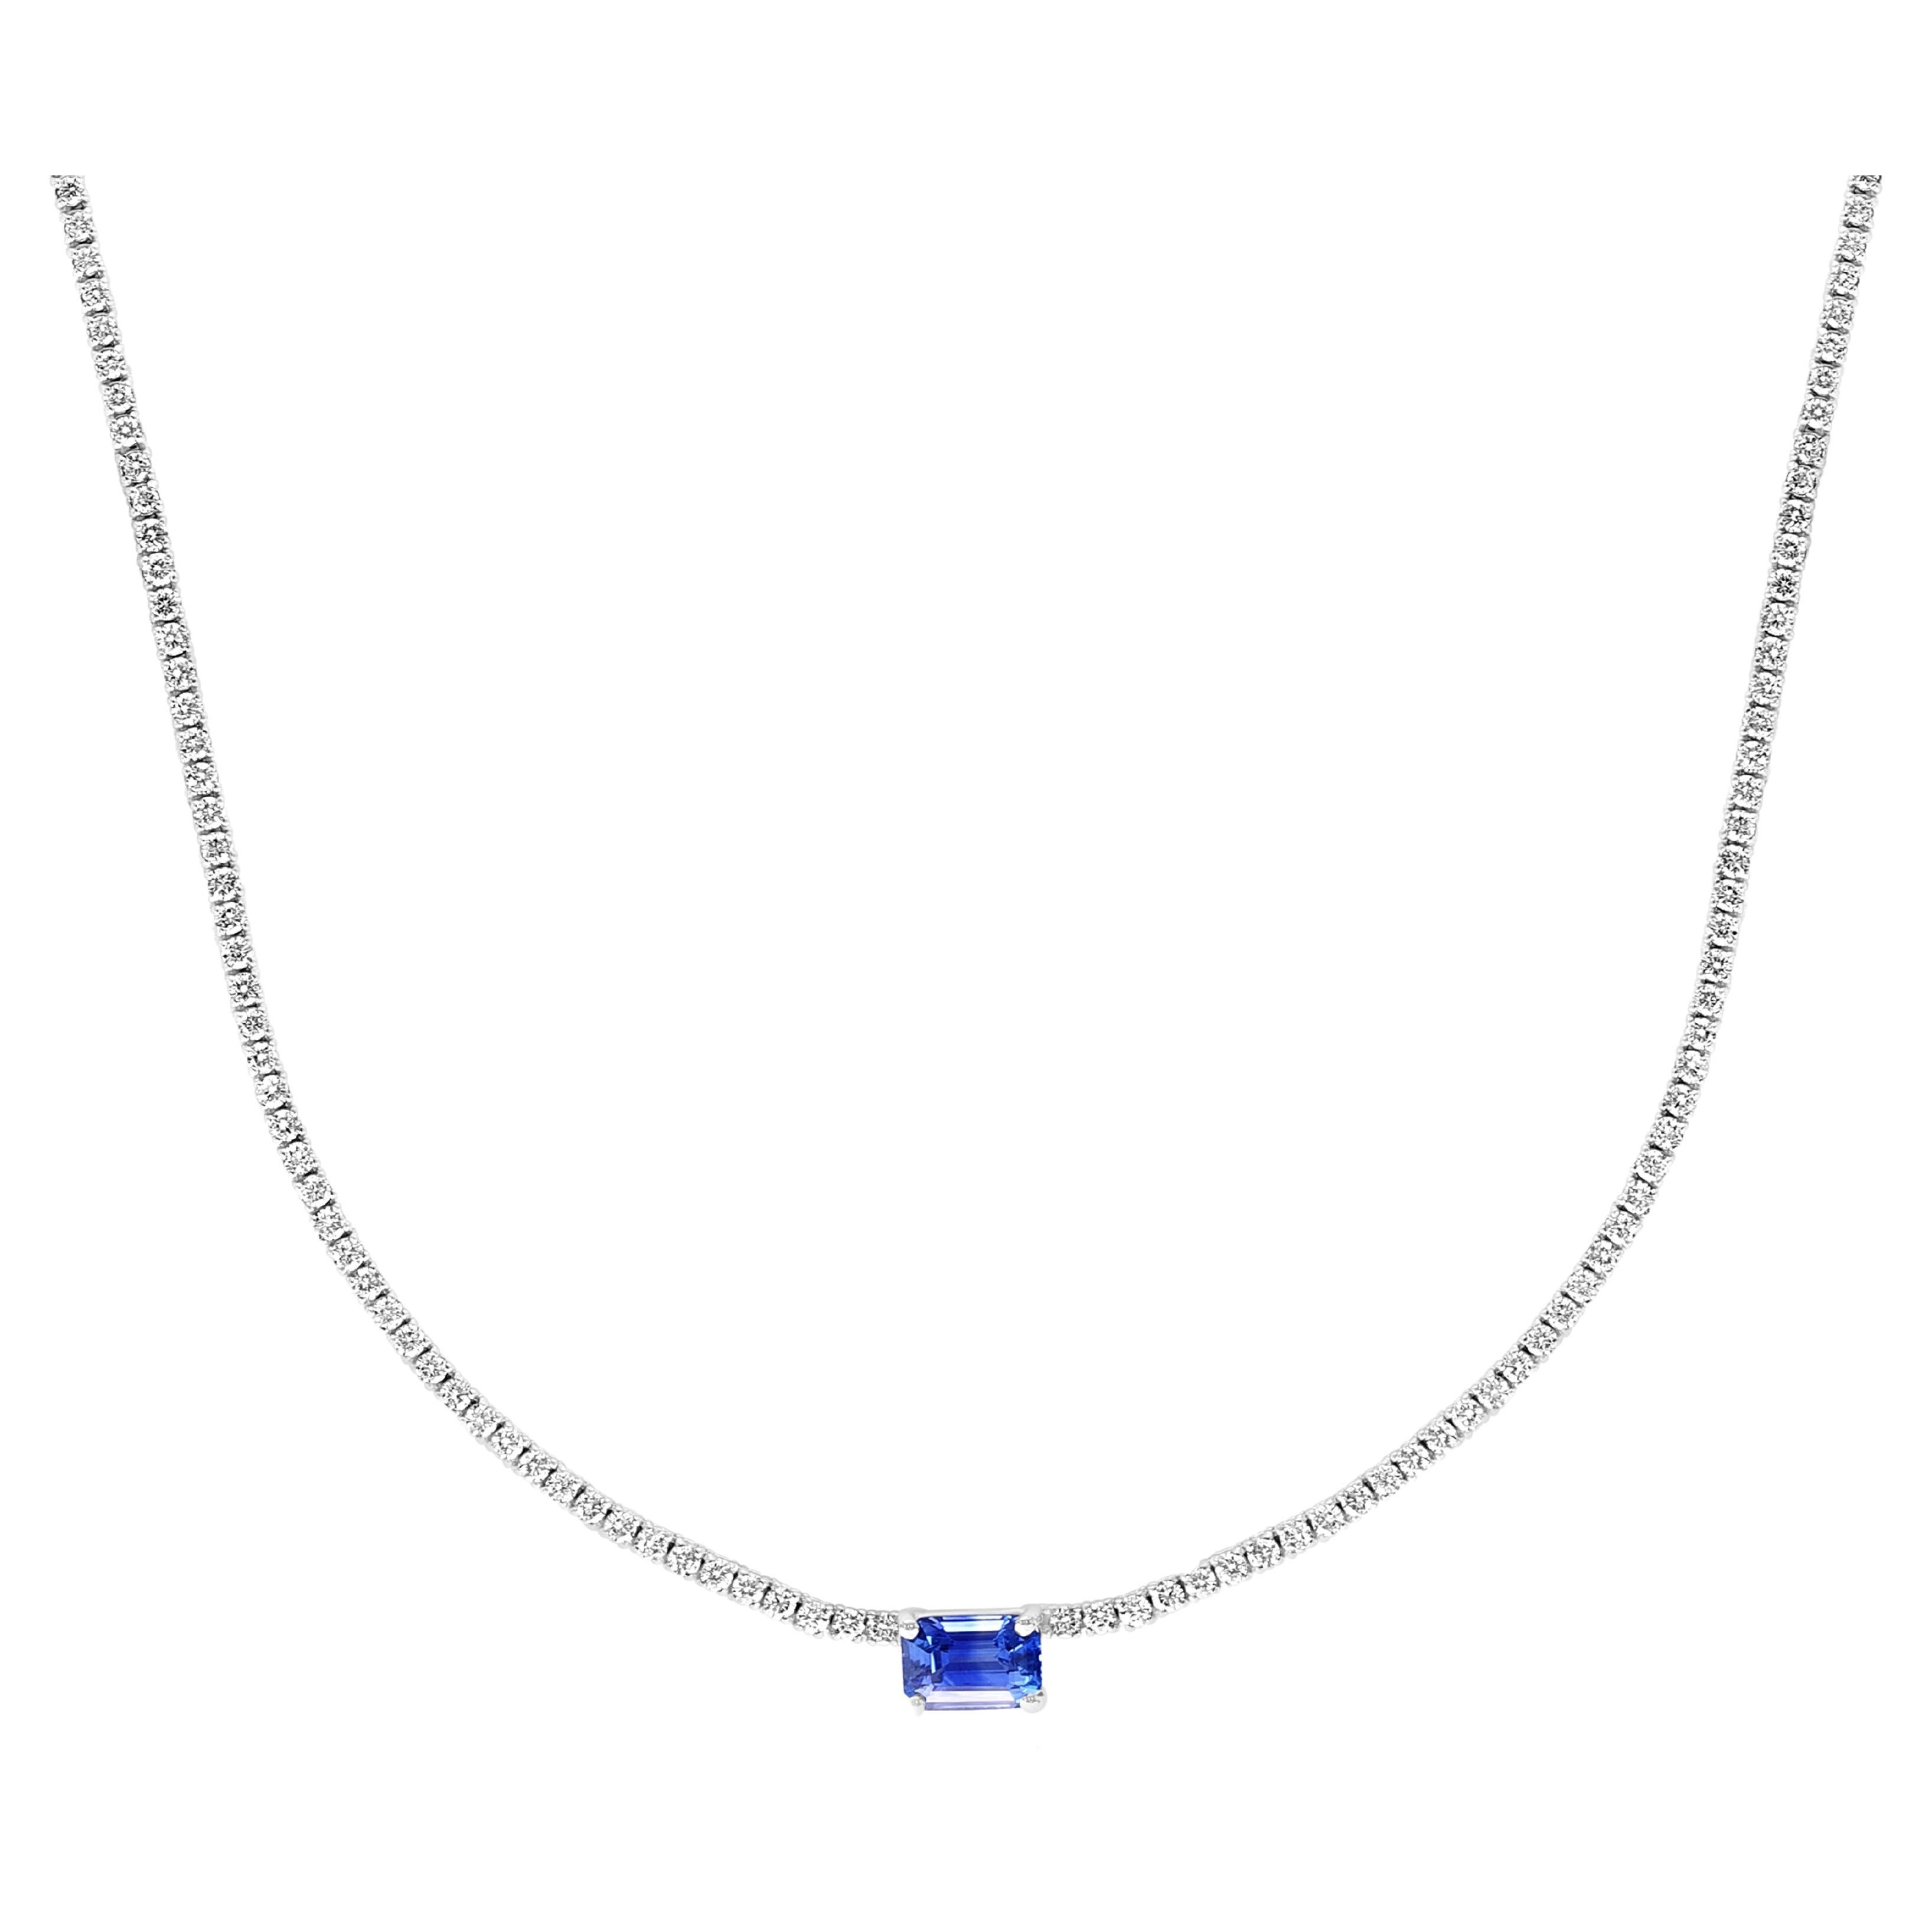 1.18 Carat Emerald cut Sapphire and Diamond Tennis Necklace in 14K White Gold For Sale